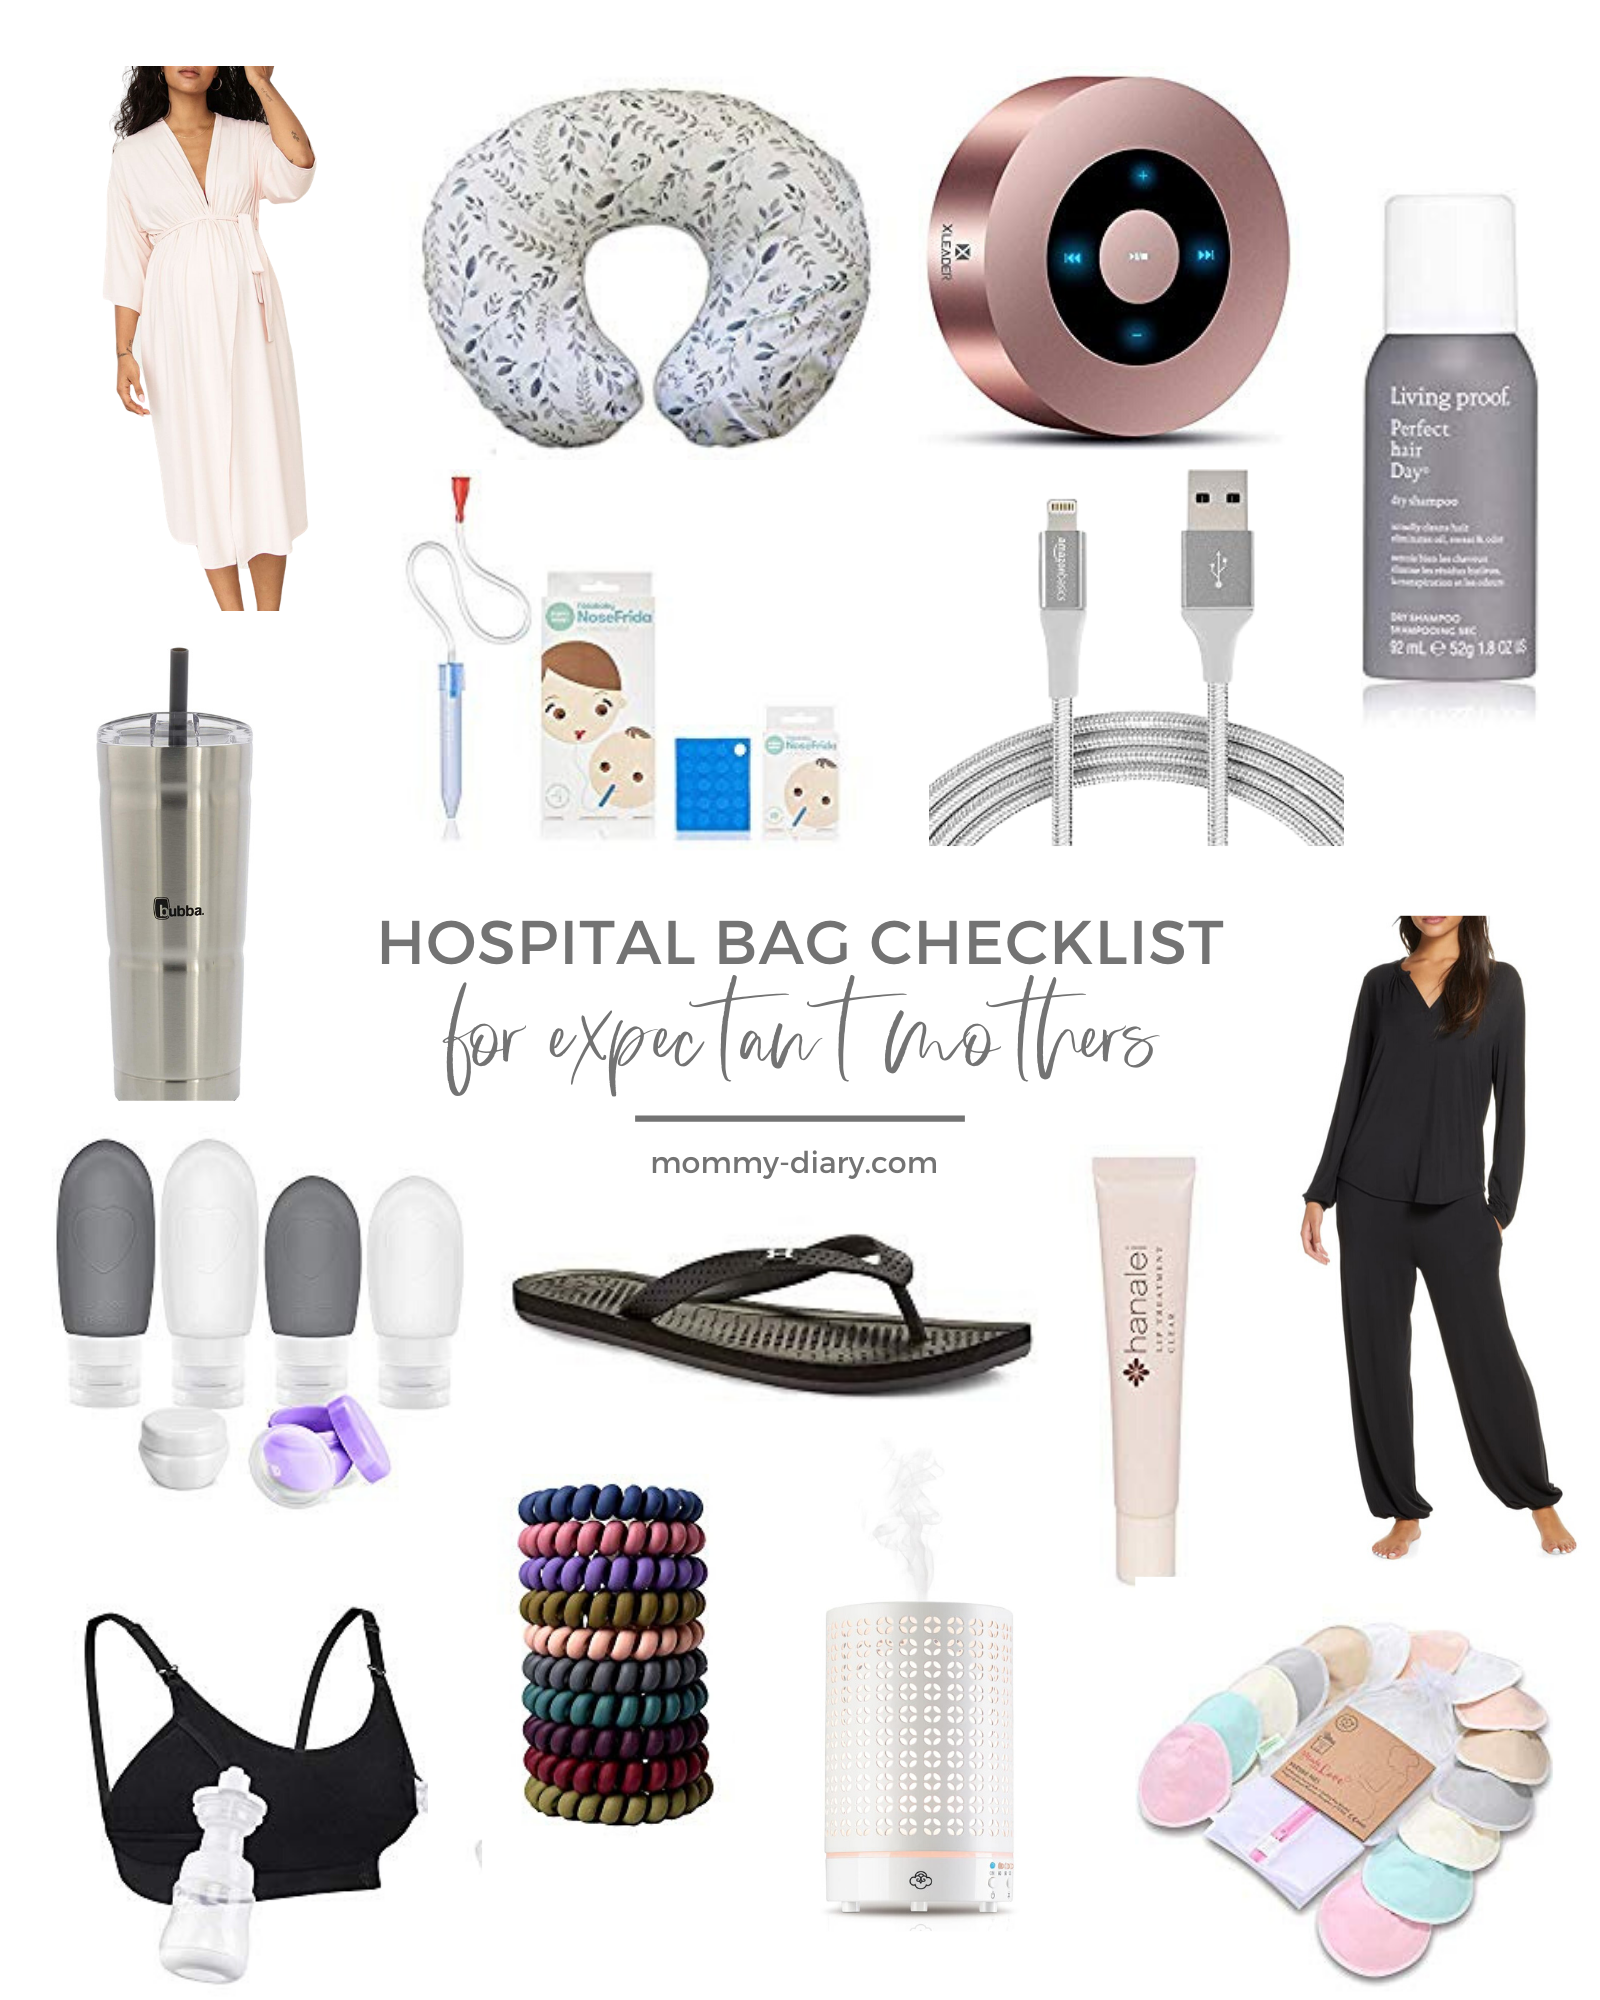 https://mommy-diary.com/wp-content/uploads/2020/01/Hospital-Bag-Checklist-2.png